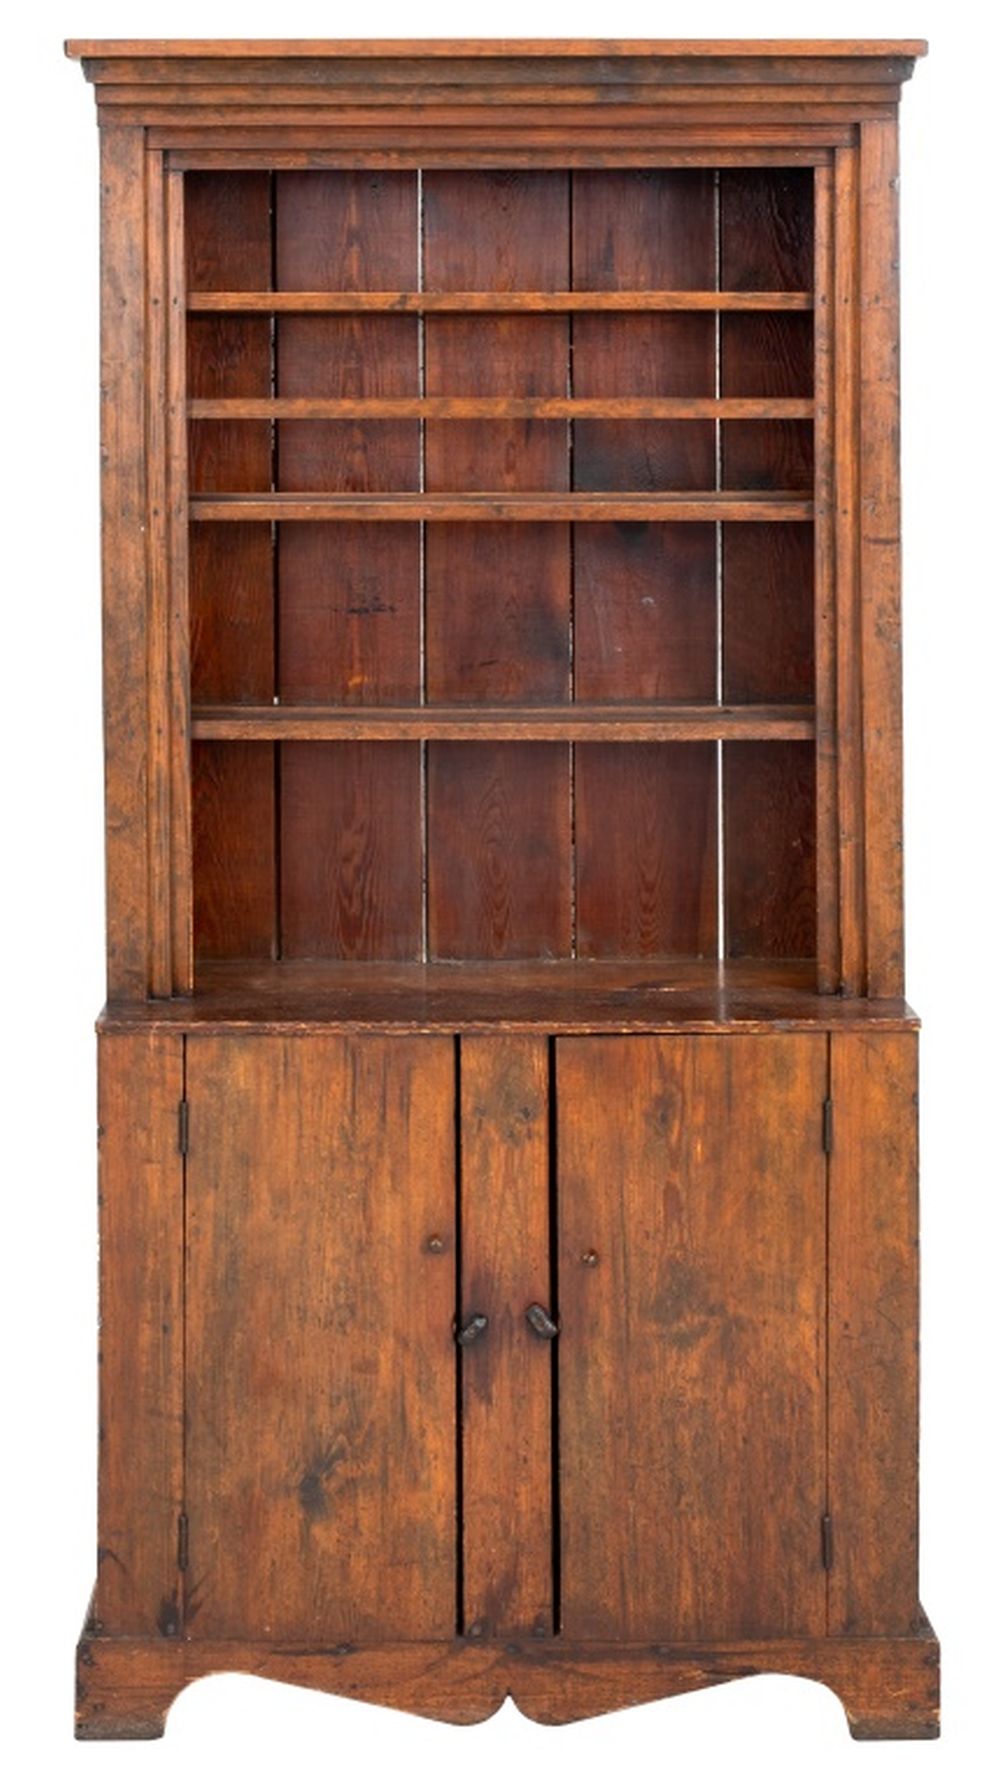 RUSTIC COUNTRY WOODEN HUTCH CABINET 3b4ccc